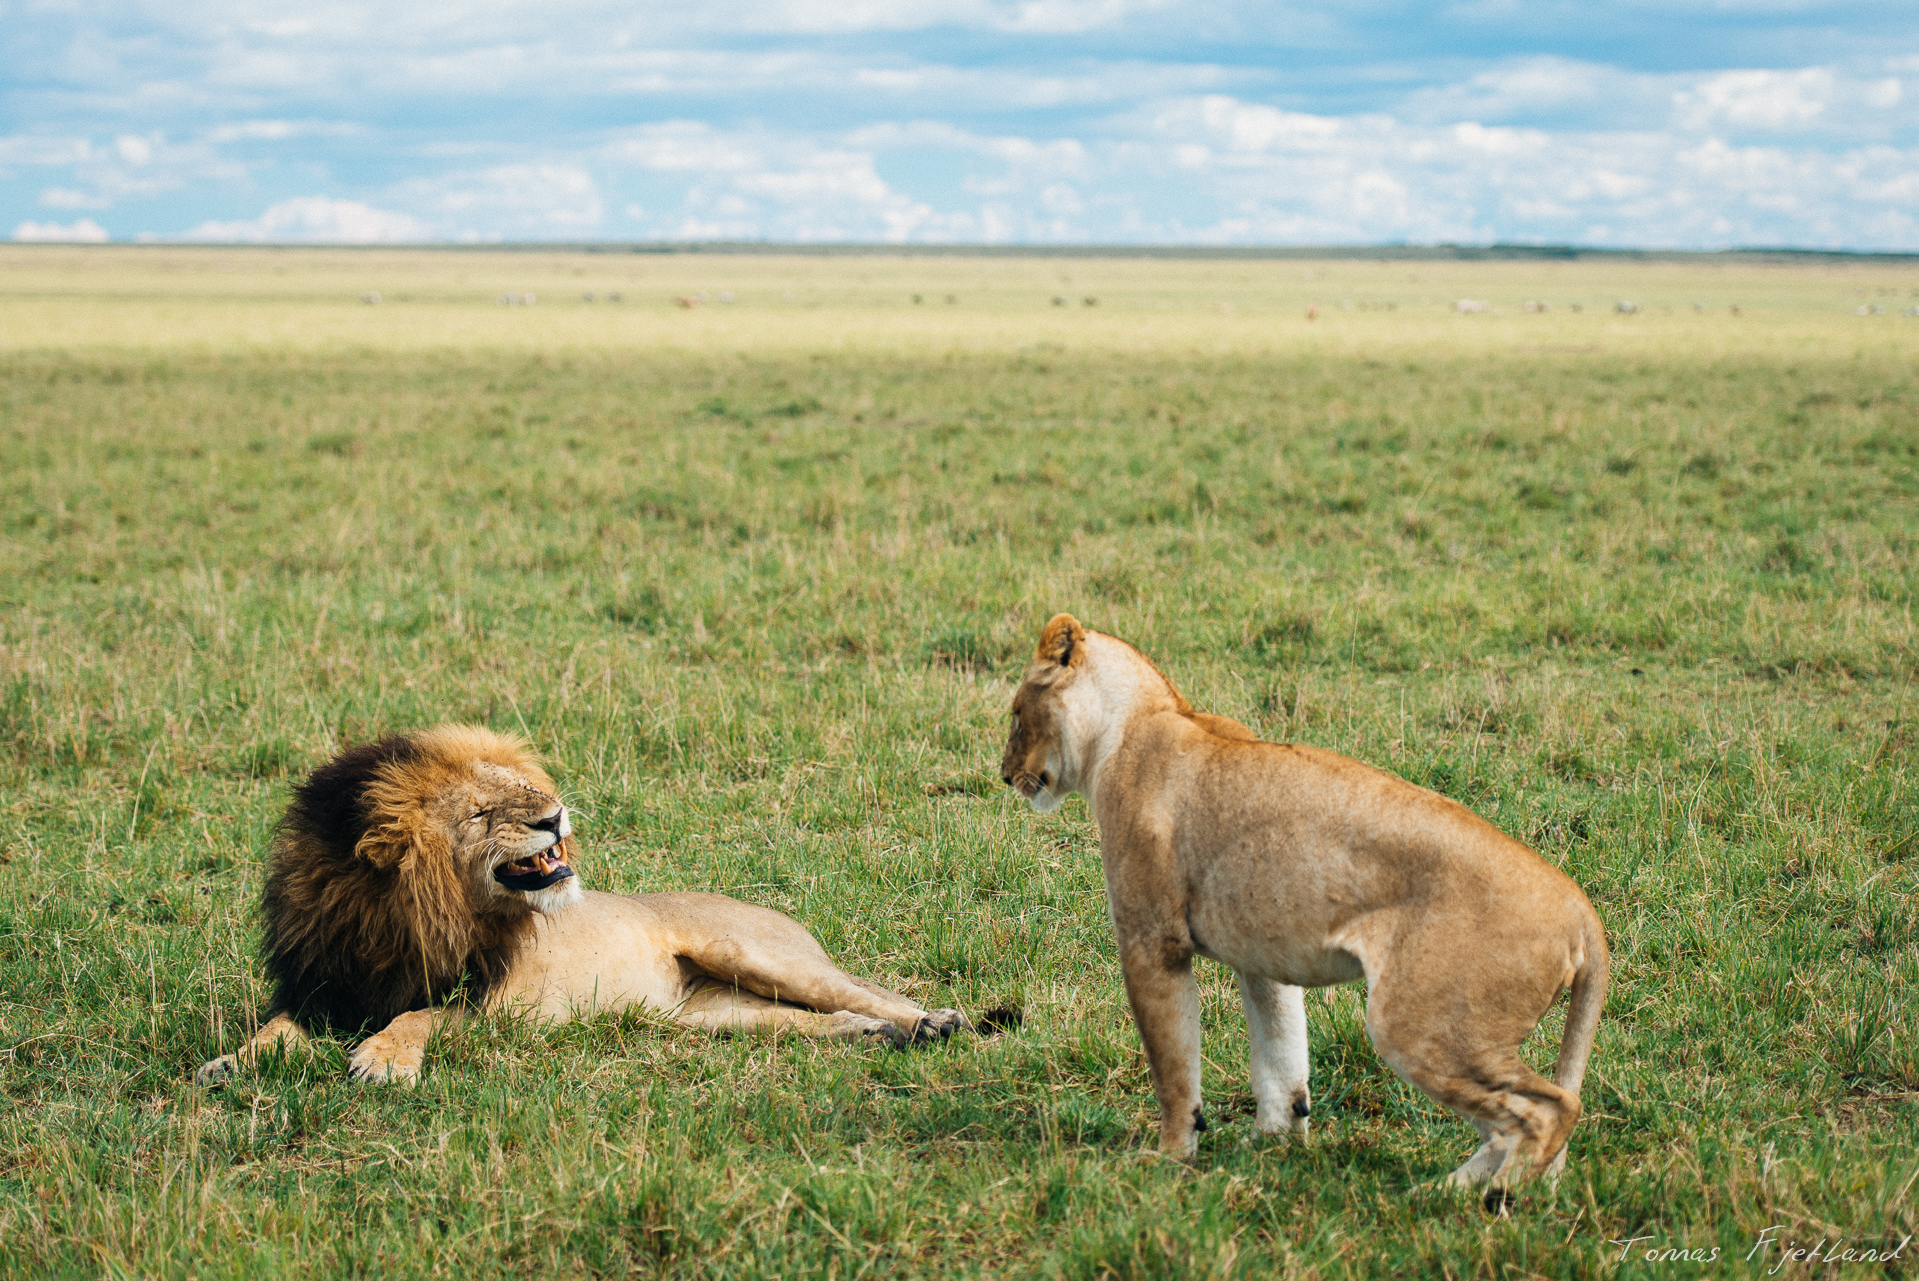 There's not insignificant tension between a mating couple of lions.